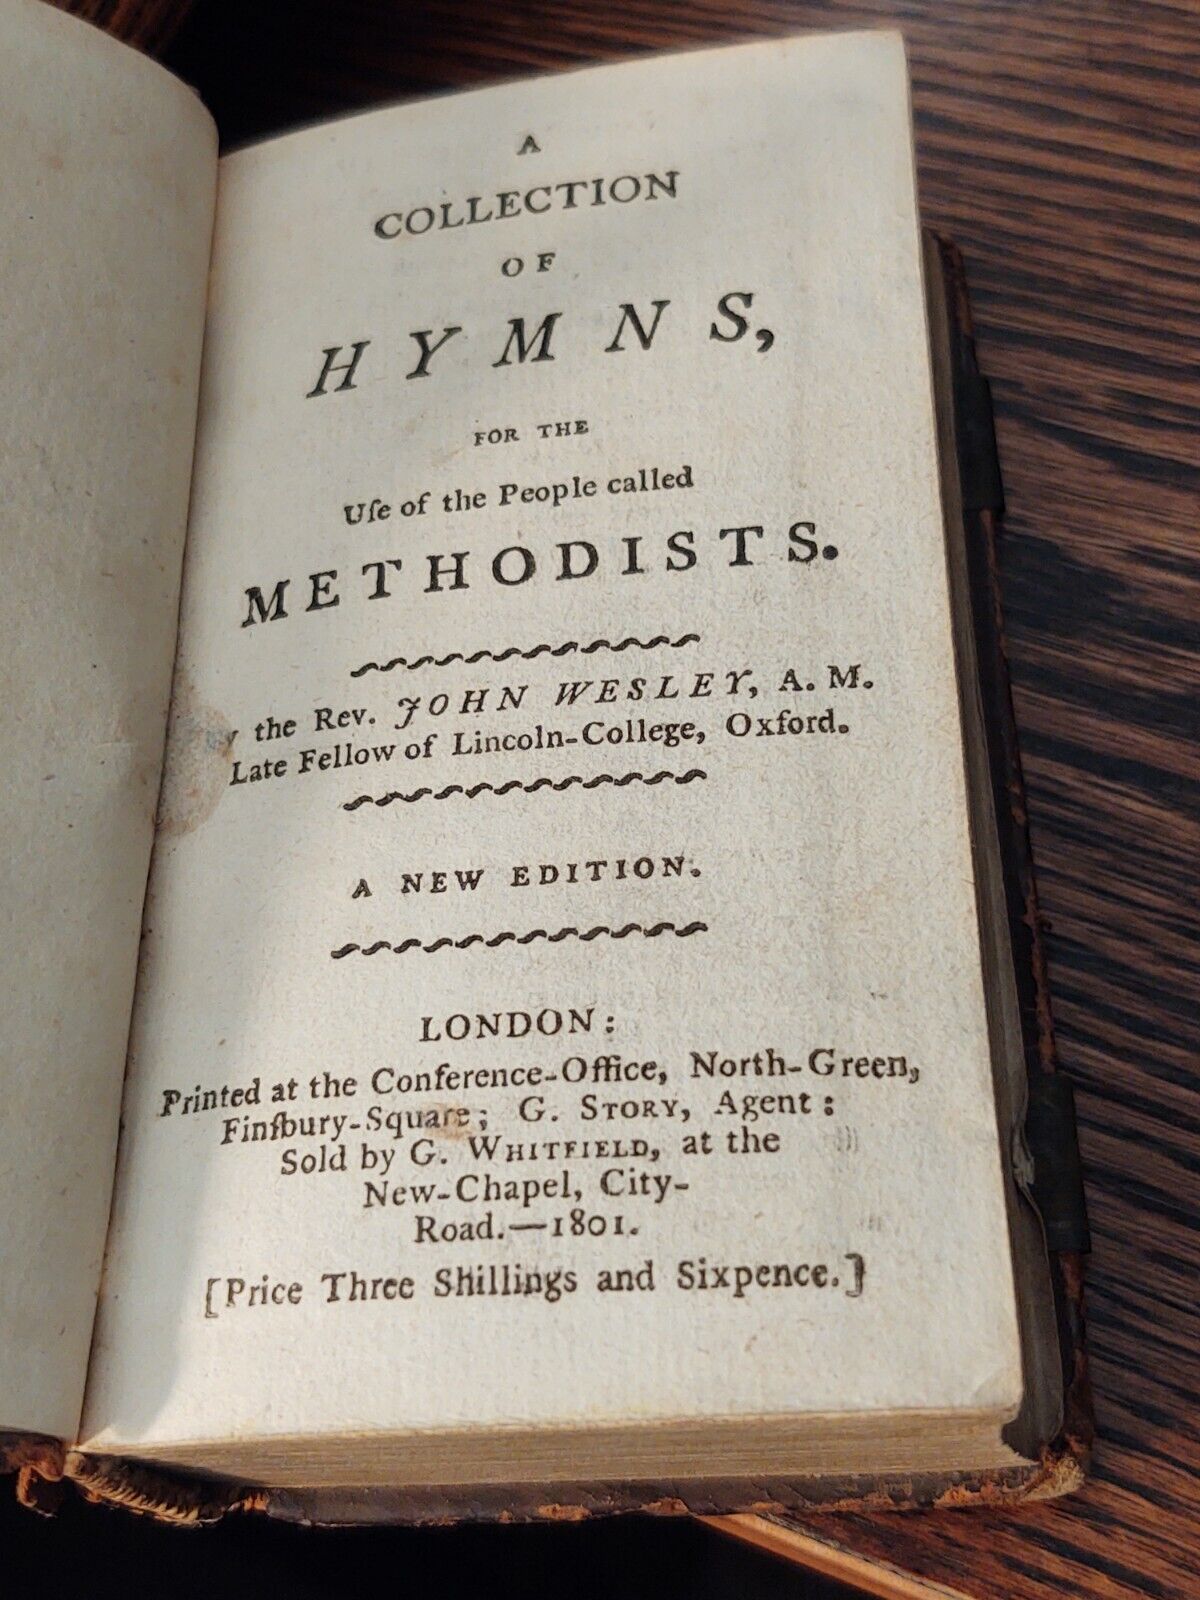 A COLLECTION OF HYMNS FOR THE USE OF THE PEOPLE CALLED METHODISTS, London - 1801